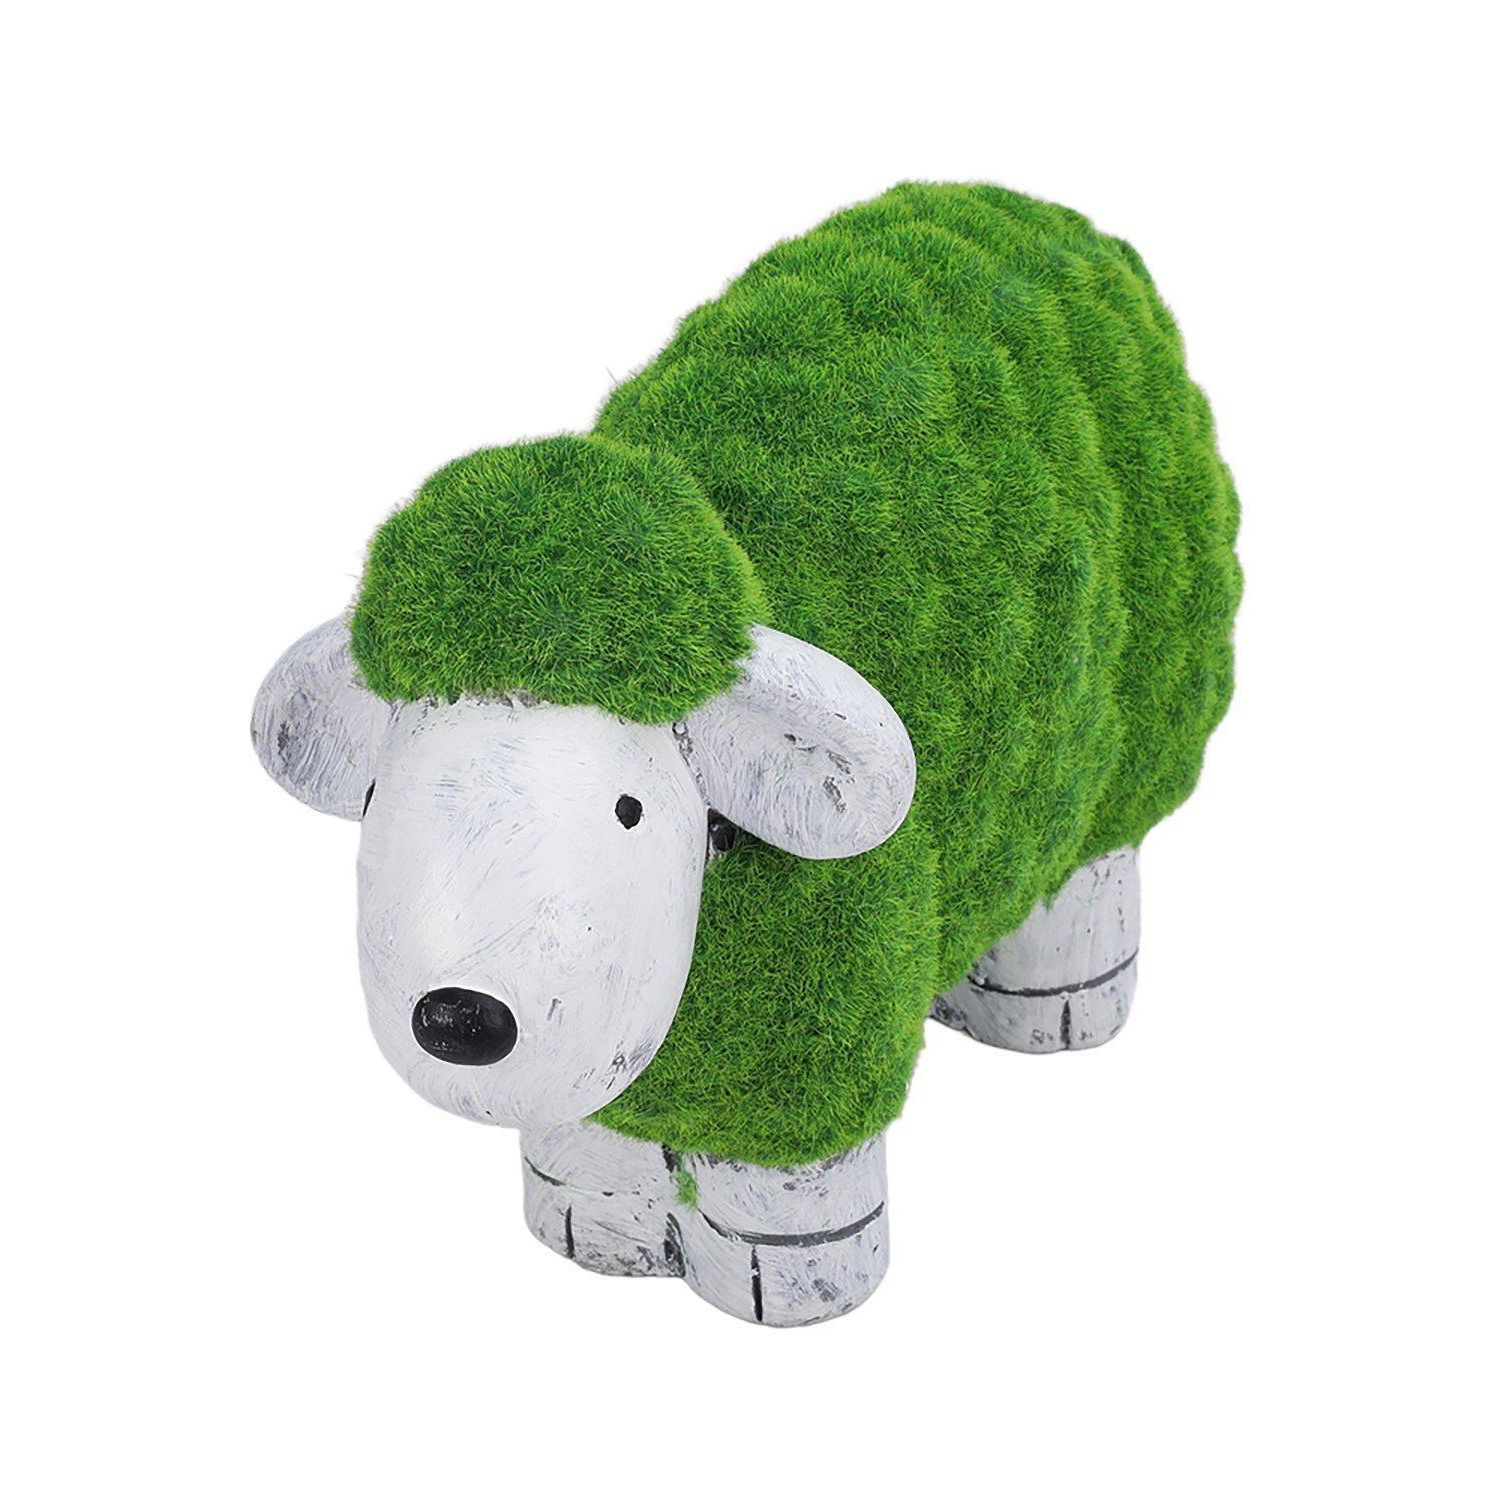 Sheep Garden Ornament Grass and Stone Effect Animal Statue - image 1